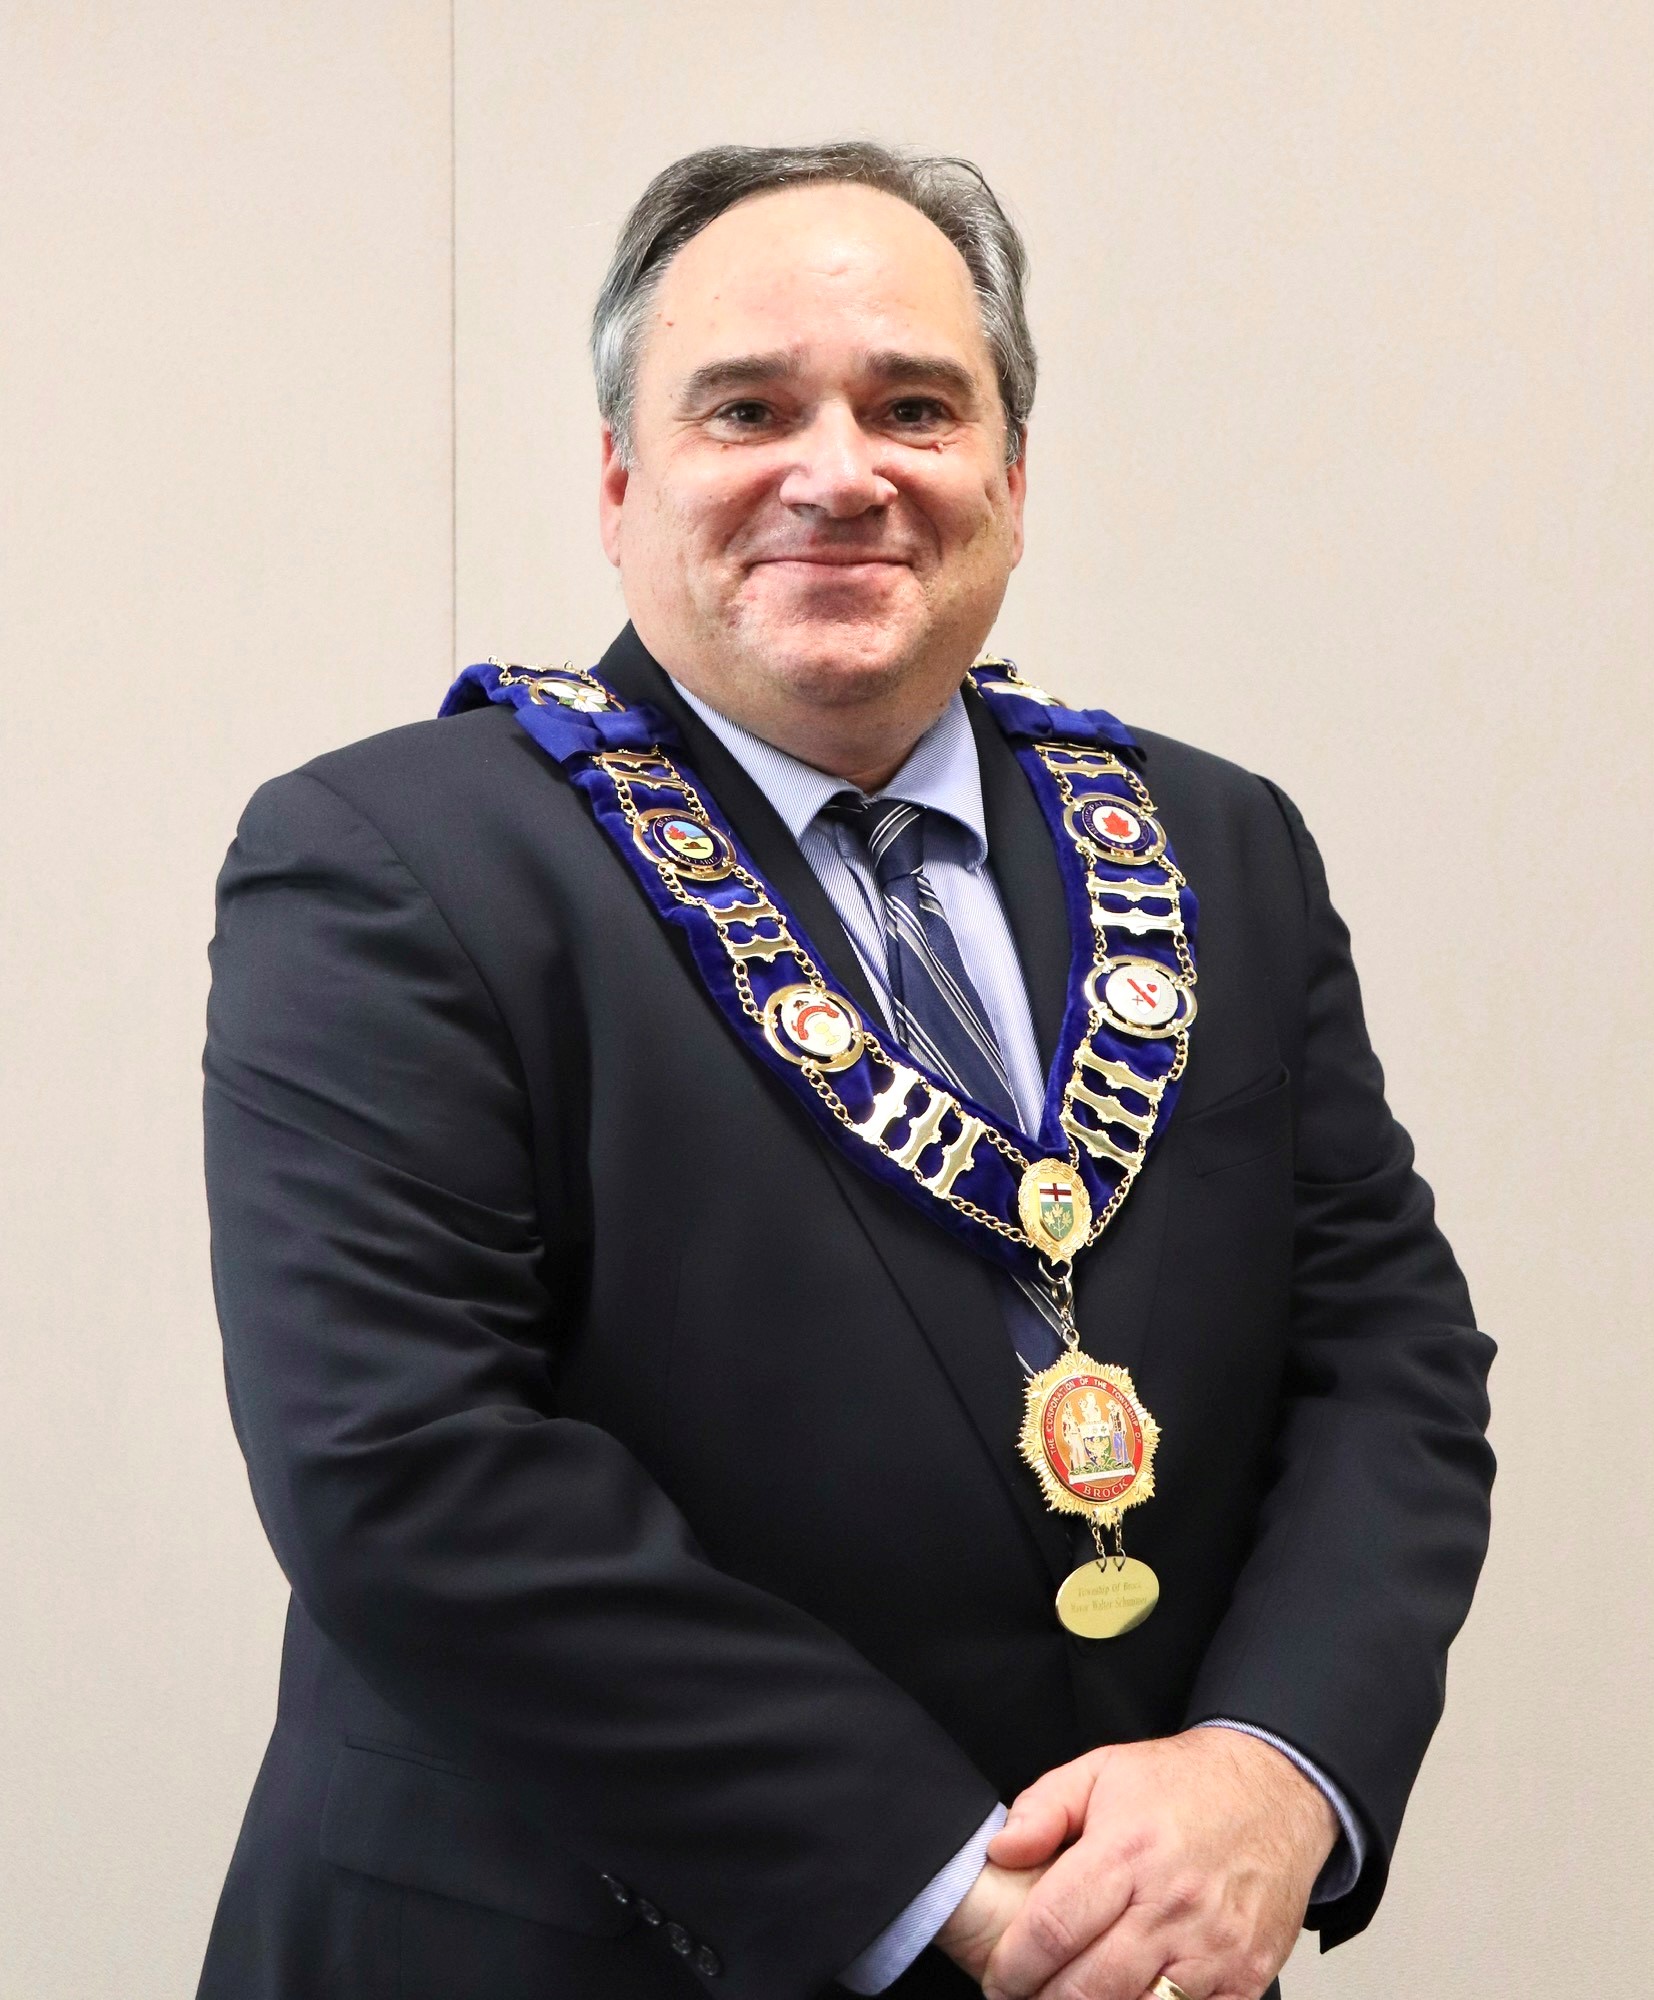 Mayor Schummer wearing the Chain of Office